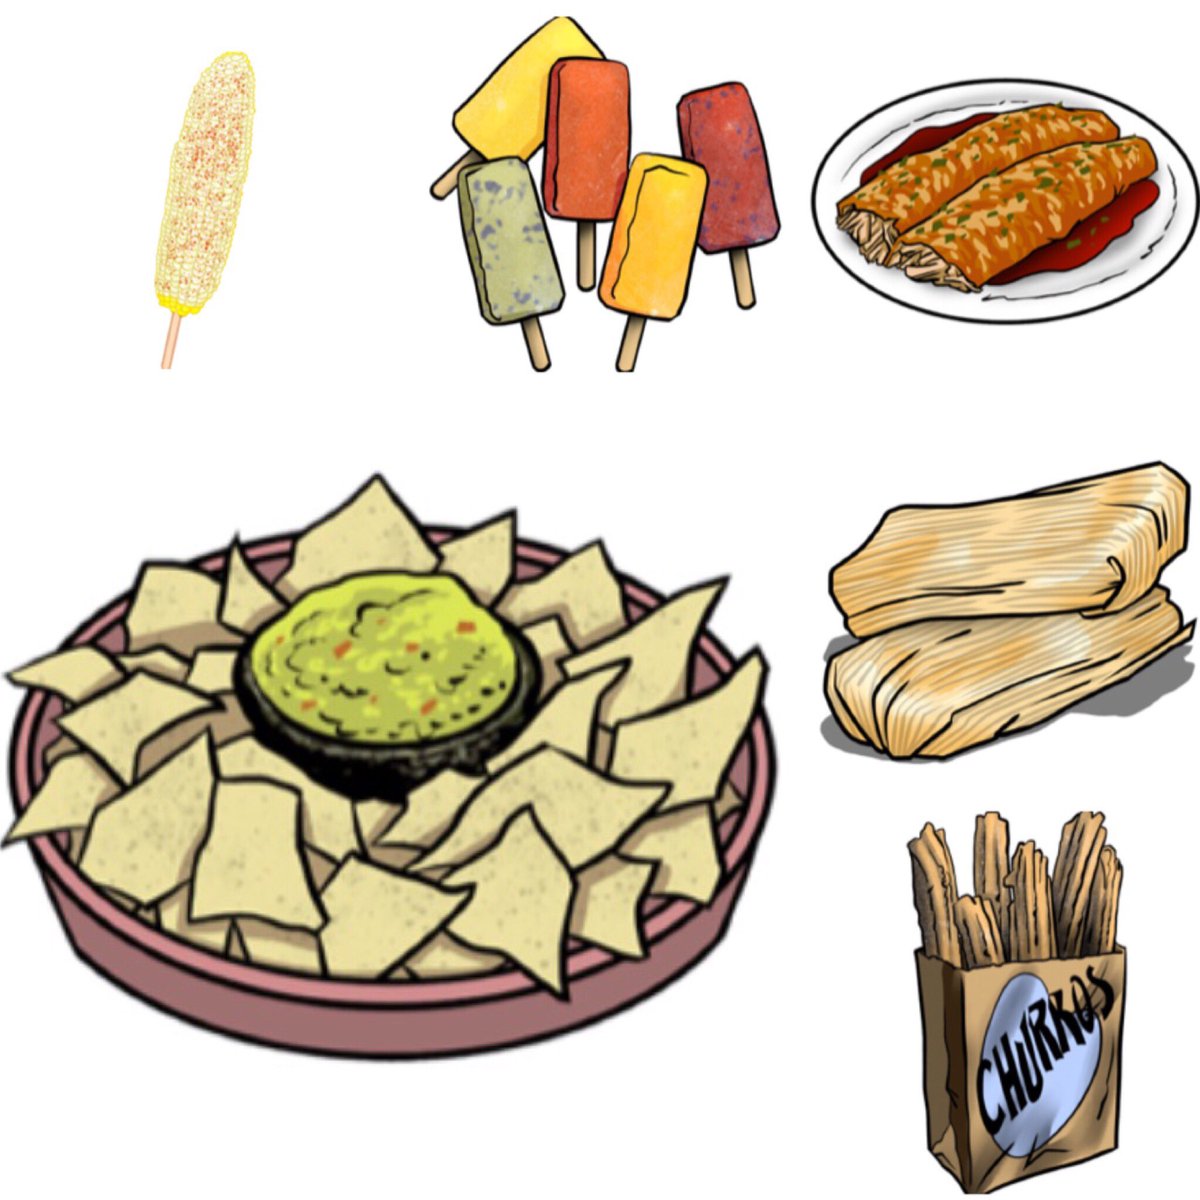 You know Latinos needed more food emojis than just a taco and a burrito #Evamoji https://t.co/t7loEEnEpO https://t.co/ty58ux8hUj